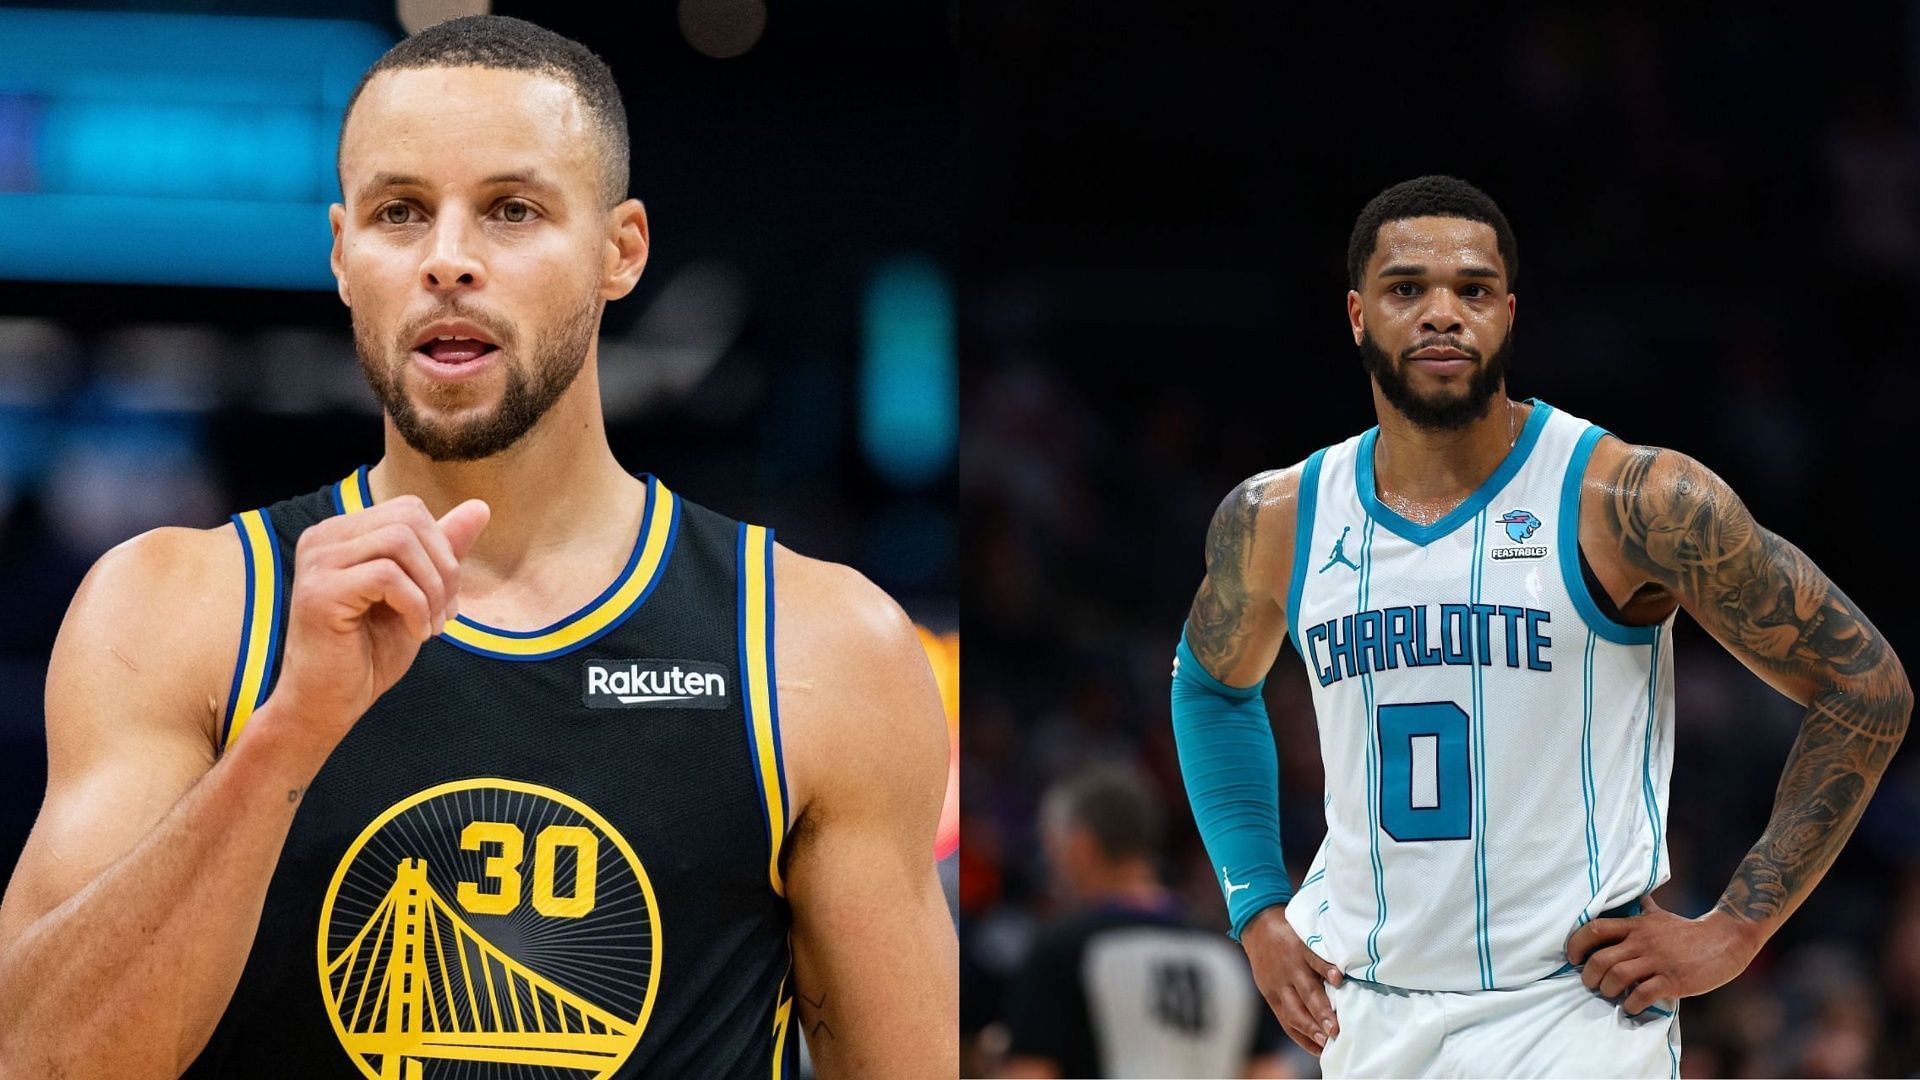 How to watch Golden State Warriors vs Charlotte Hornets NBA basketball game tonight?